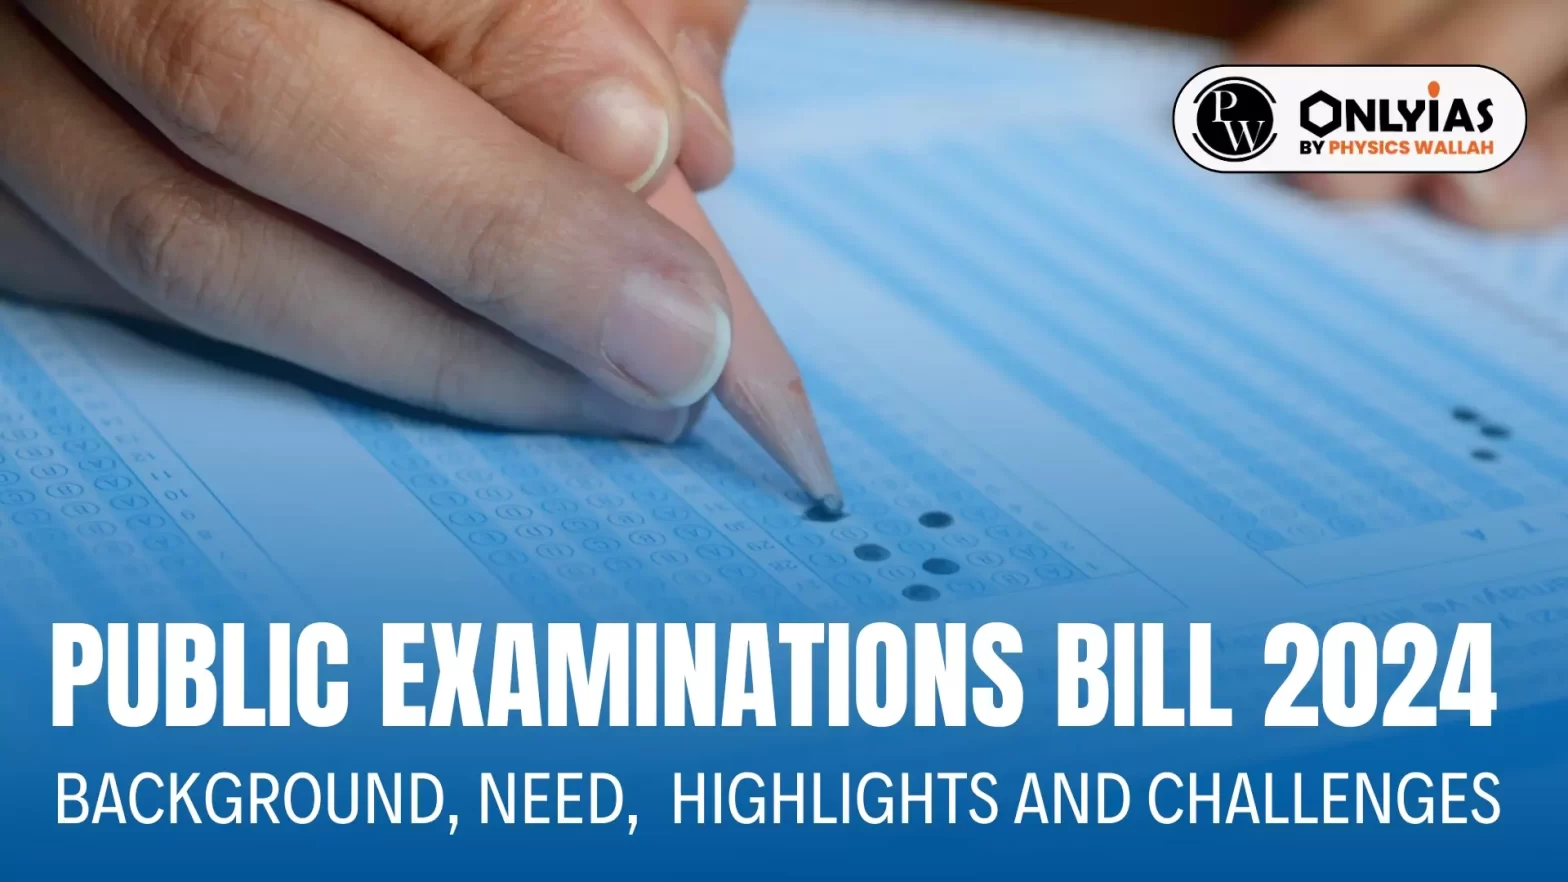 Public Examinations Bill 2024: Background, Need, Highlights and Challenges